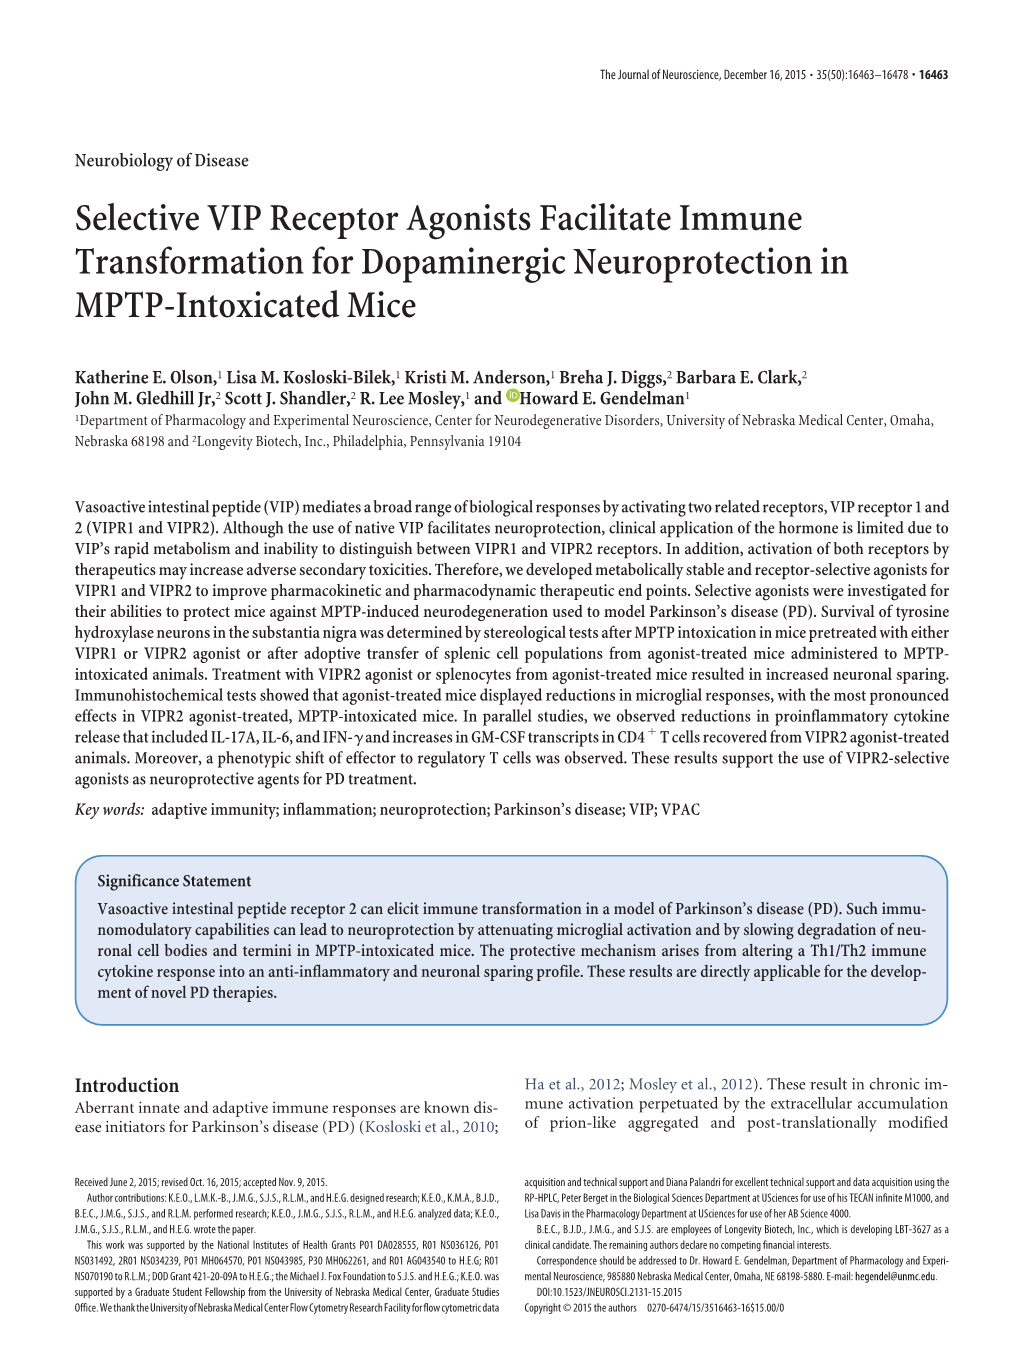 Selective VIP Receptor Agonists Facilitate Immune Transformation for Dopaminergic Neuroprotection in MPTP-Intoxicated Mice